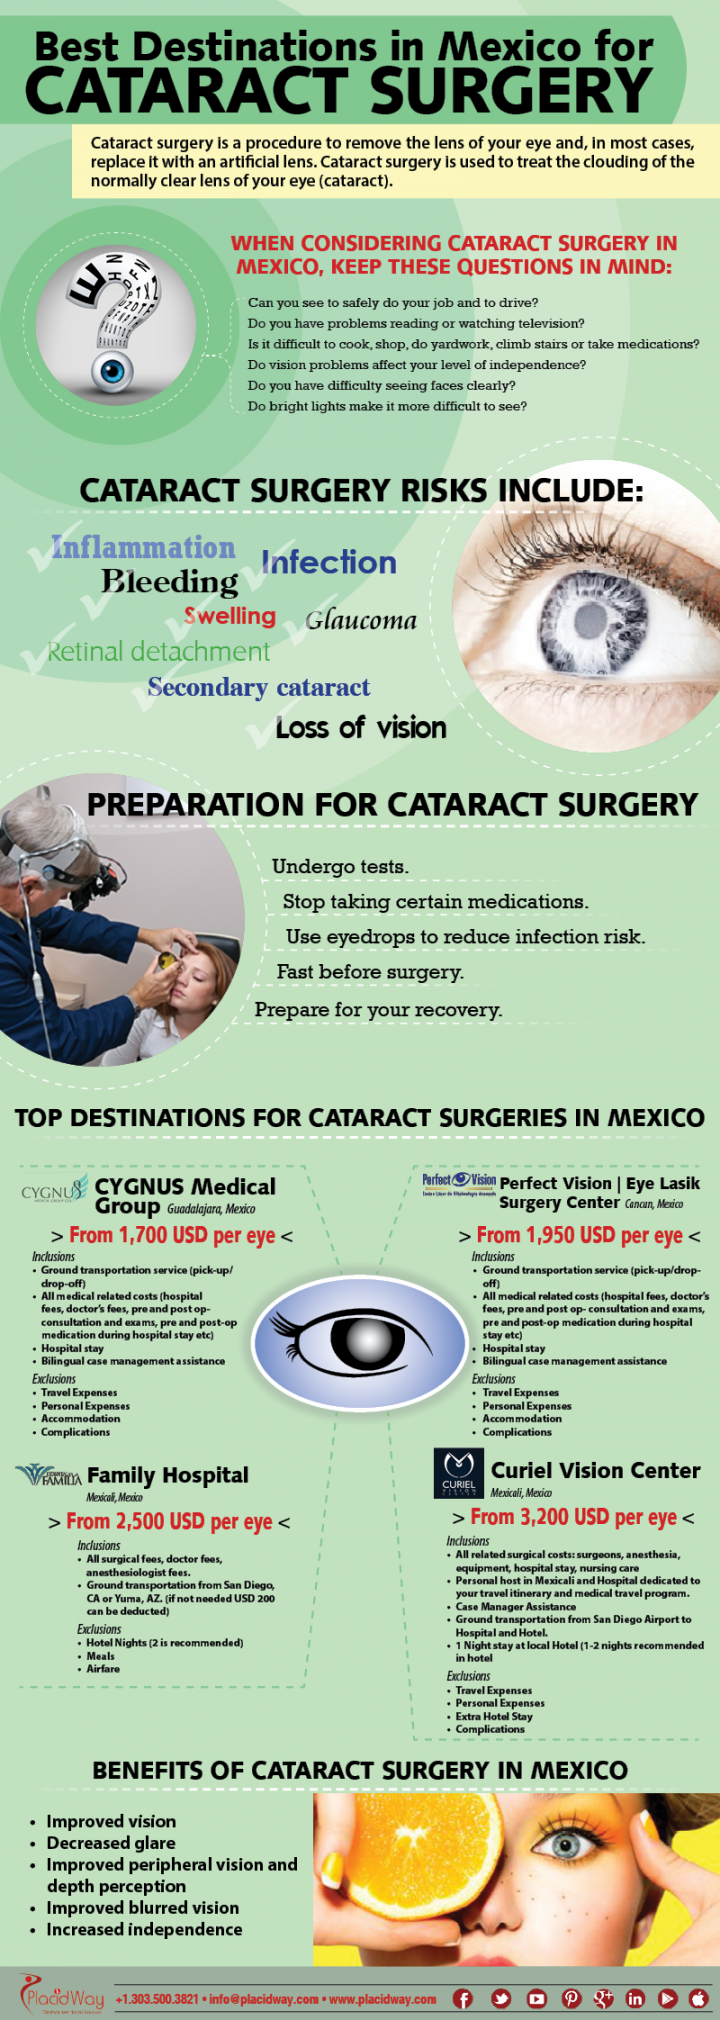 Infographics: Destinations in Mexico for Cataract Surgery